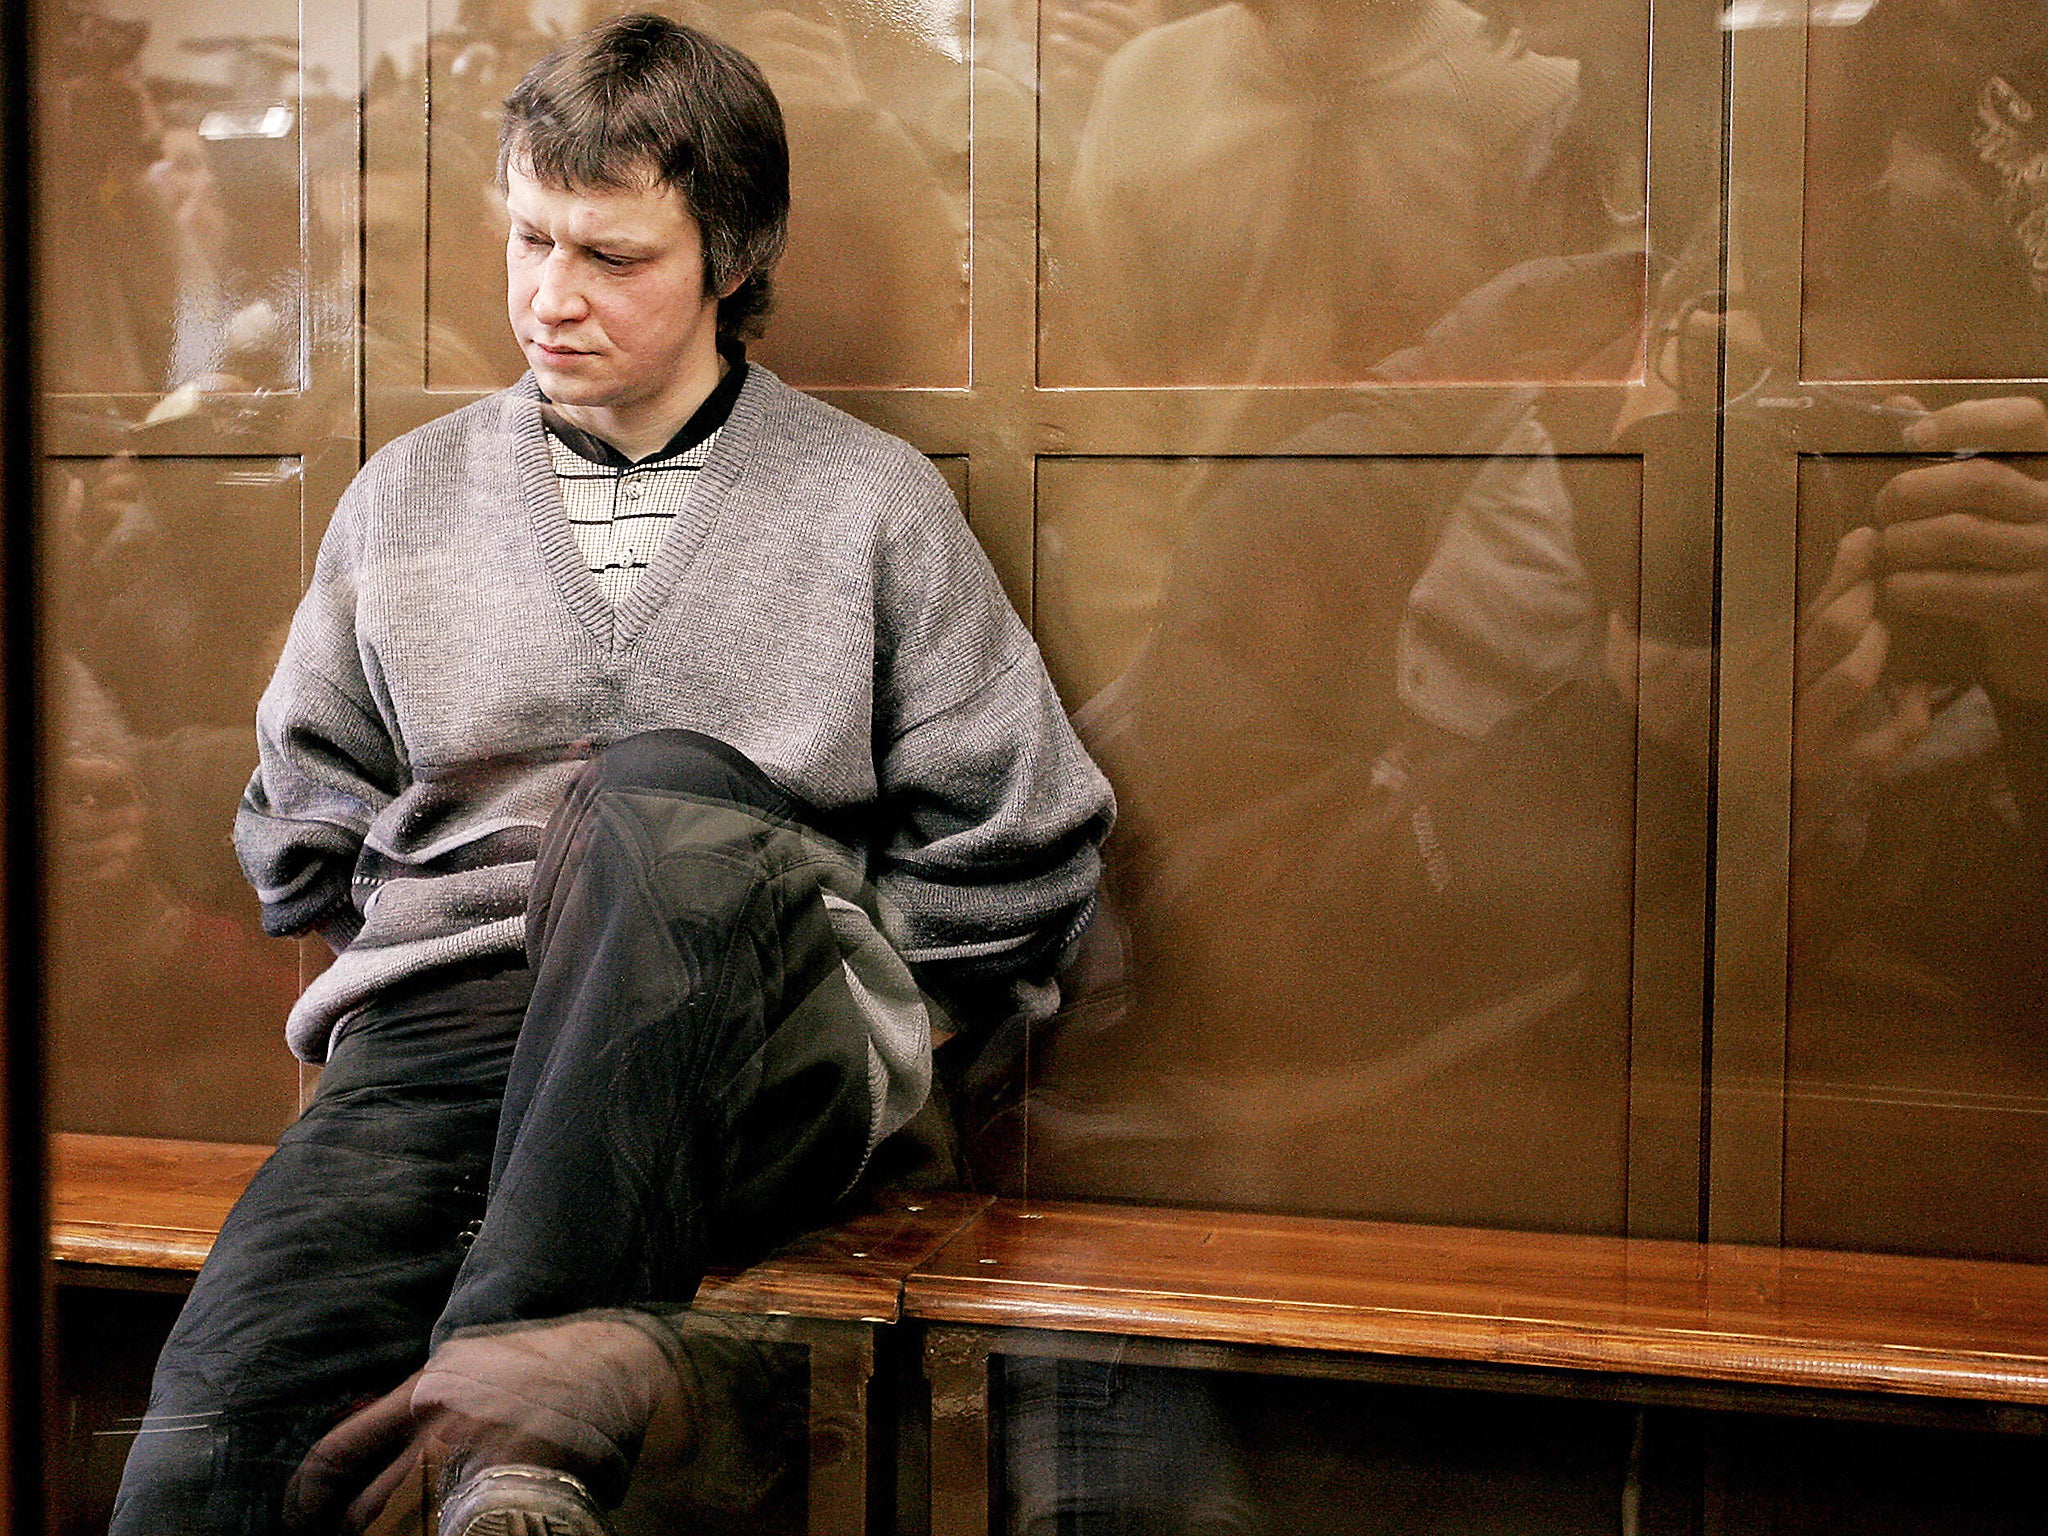 &#13;
... and Alexander Pichushkin, the Moscow 'Chessboard killer' &#13;